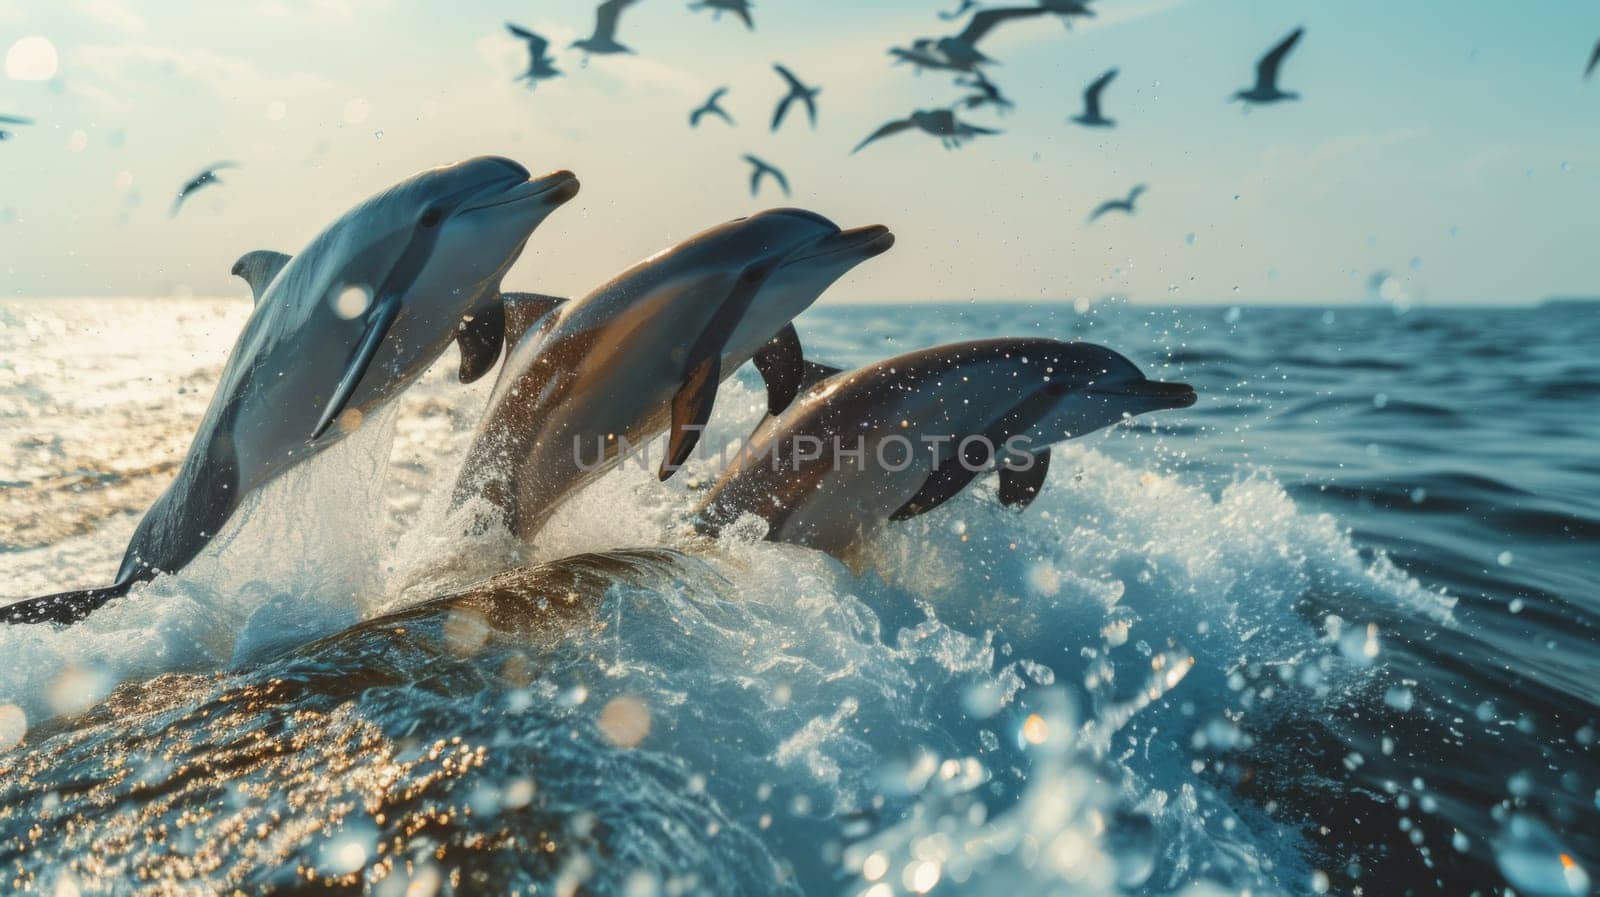 A group of dolphins jumping out of the water in front of birds, AI by starush